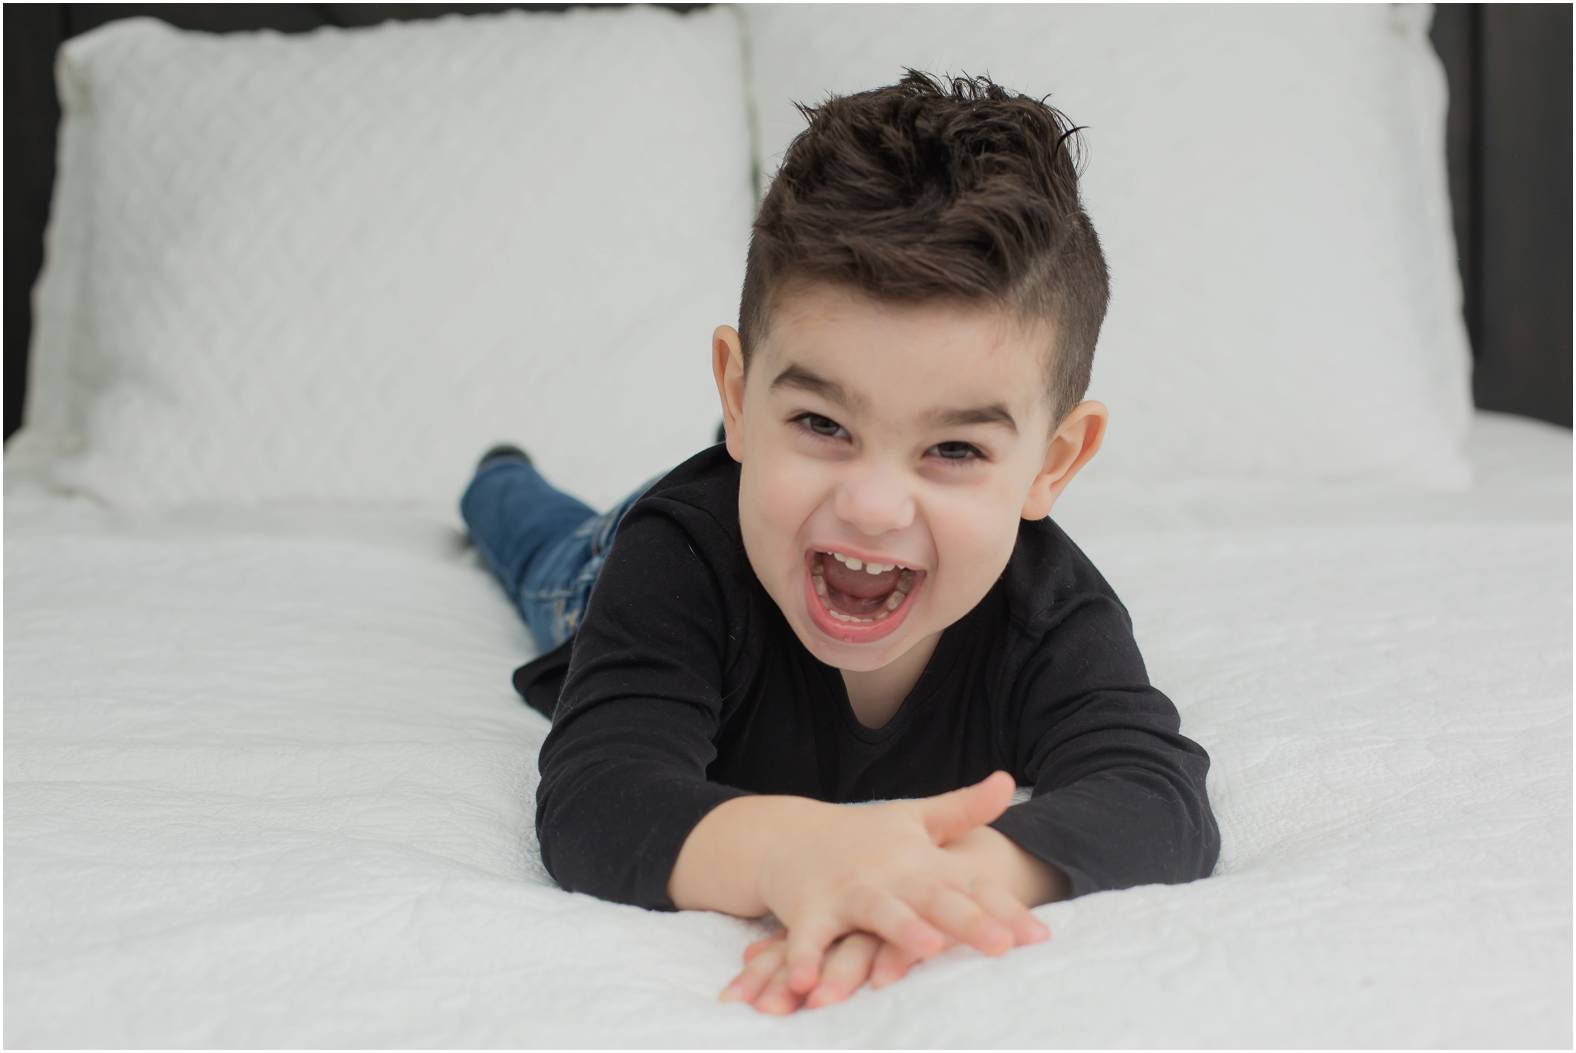 Toddler lies on bed and laughs during lifestyle newborn session.